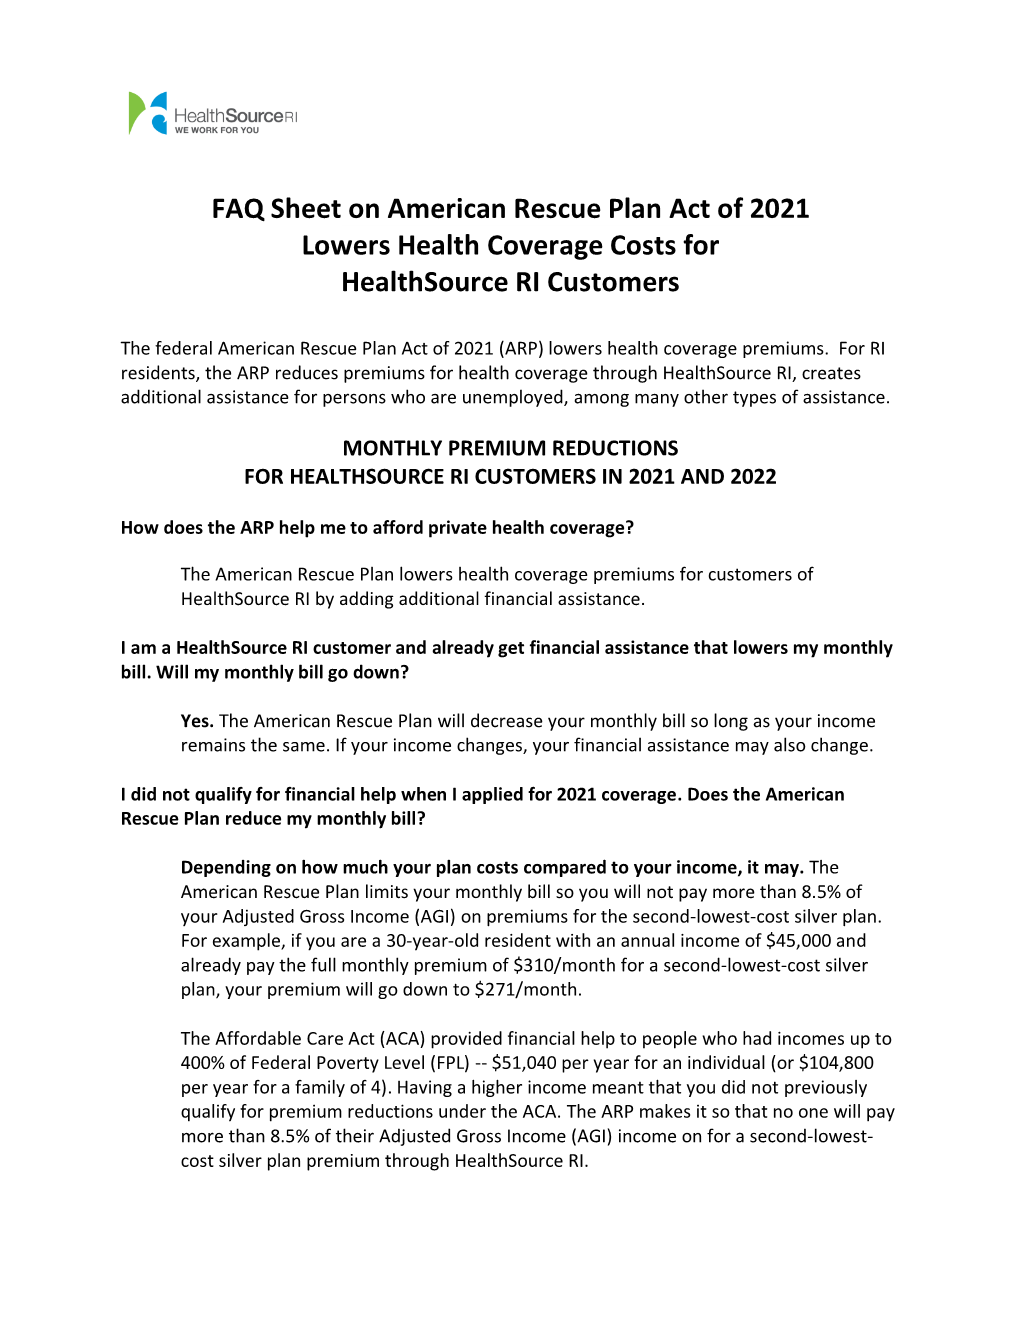 FAQ Sheet on American Rescue Plan Act of 2021 Lowers Health Coverage Costs for Healthsource RI Customers